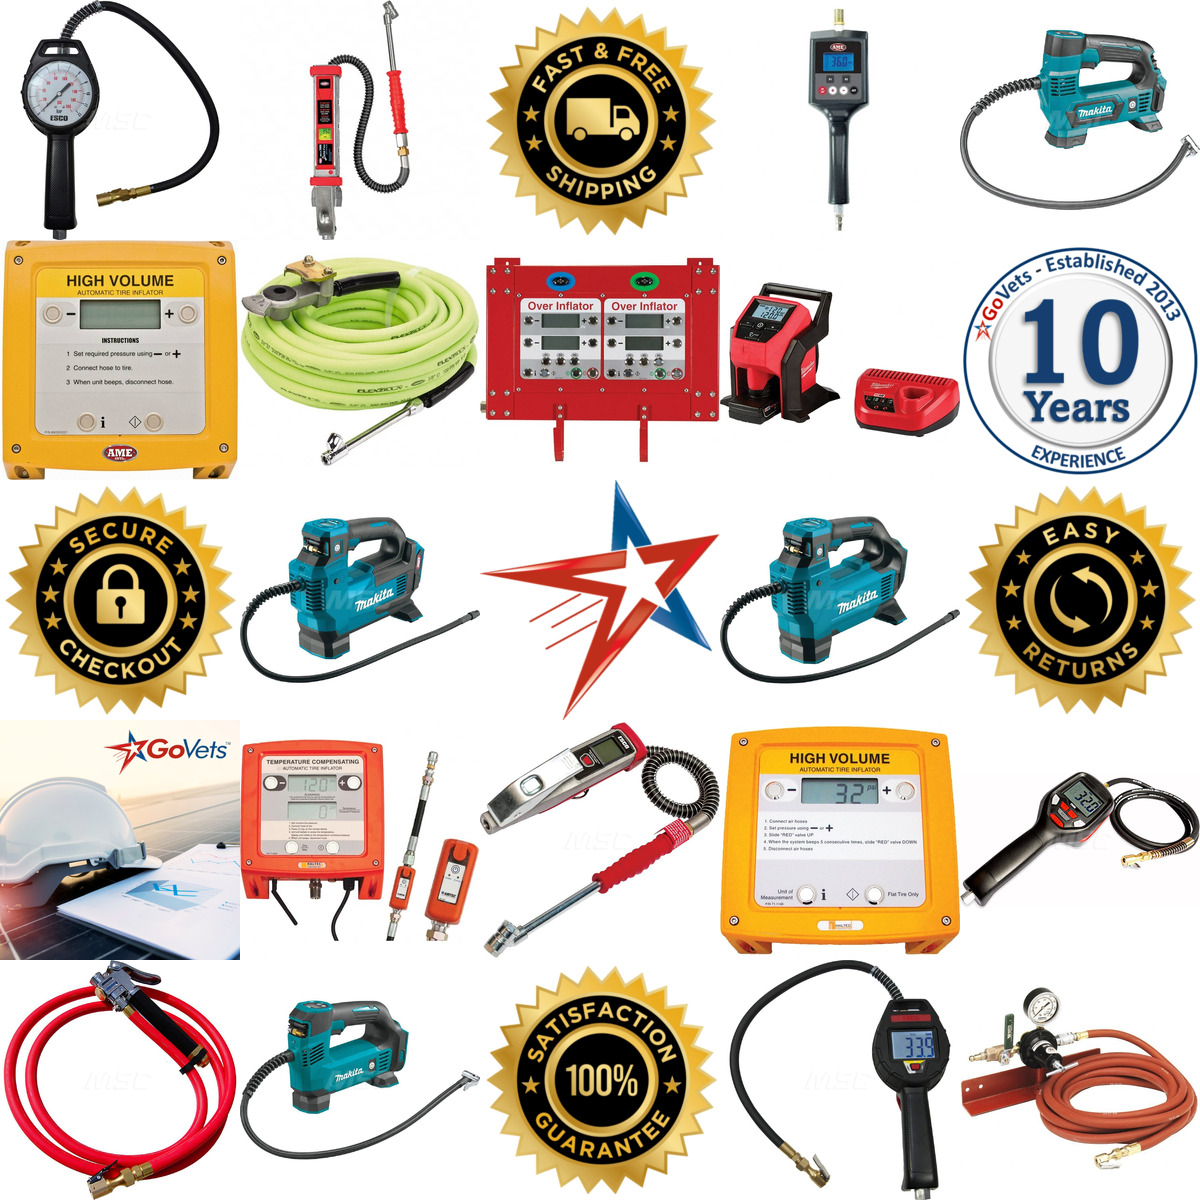 A selection of Tire Inflators products on GoVets